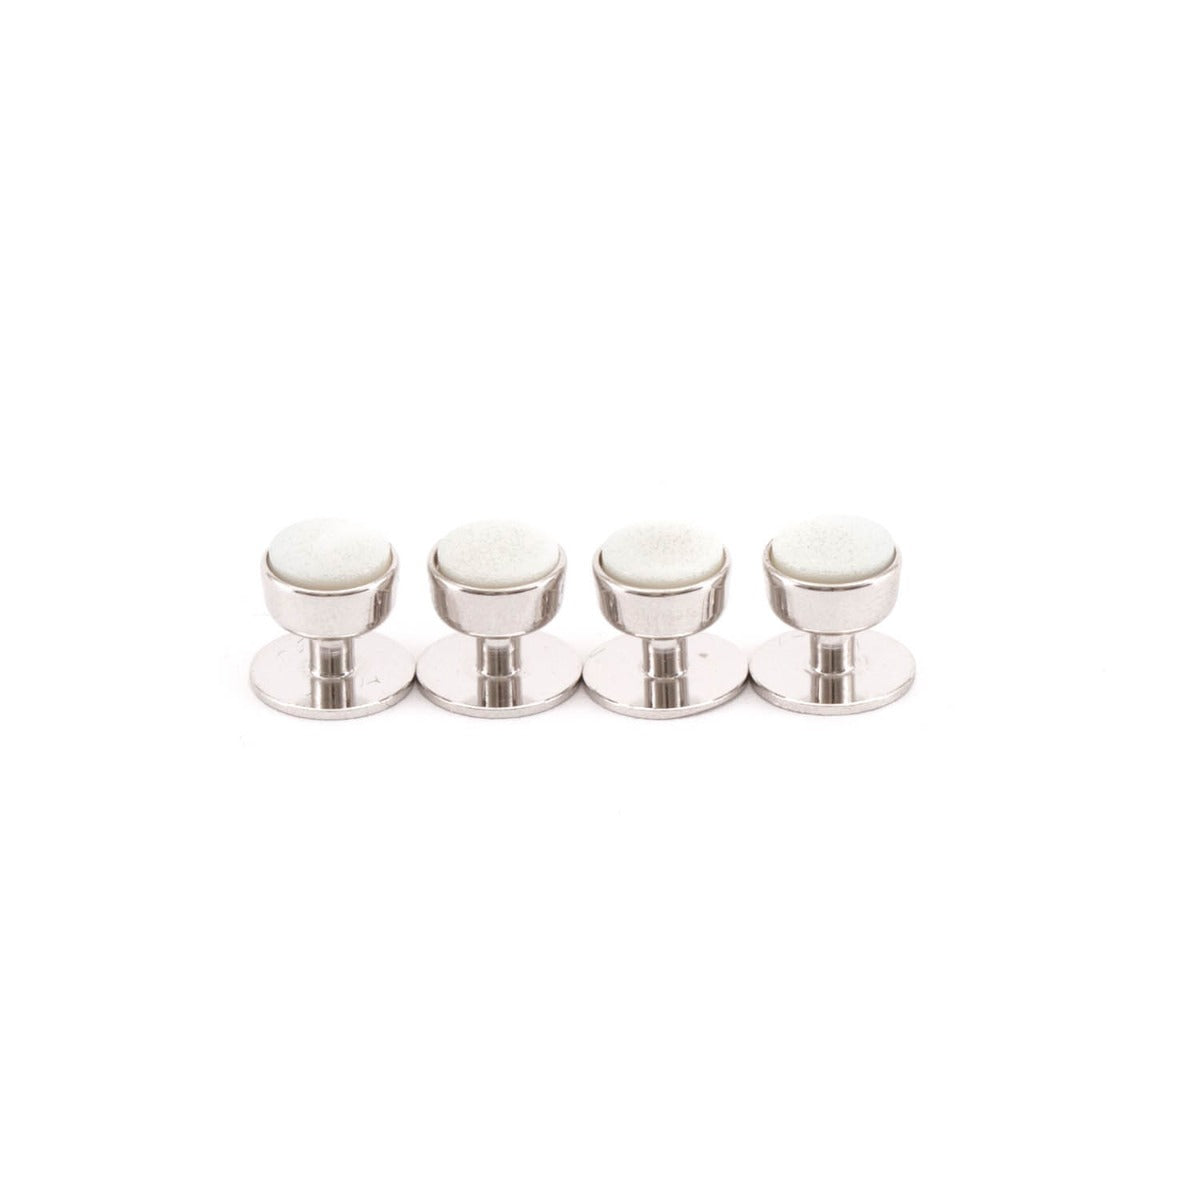 A set of four Rhodium Plated Mother of Pearl Stud Sets by KirbyAllison.com.